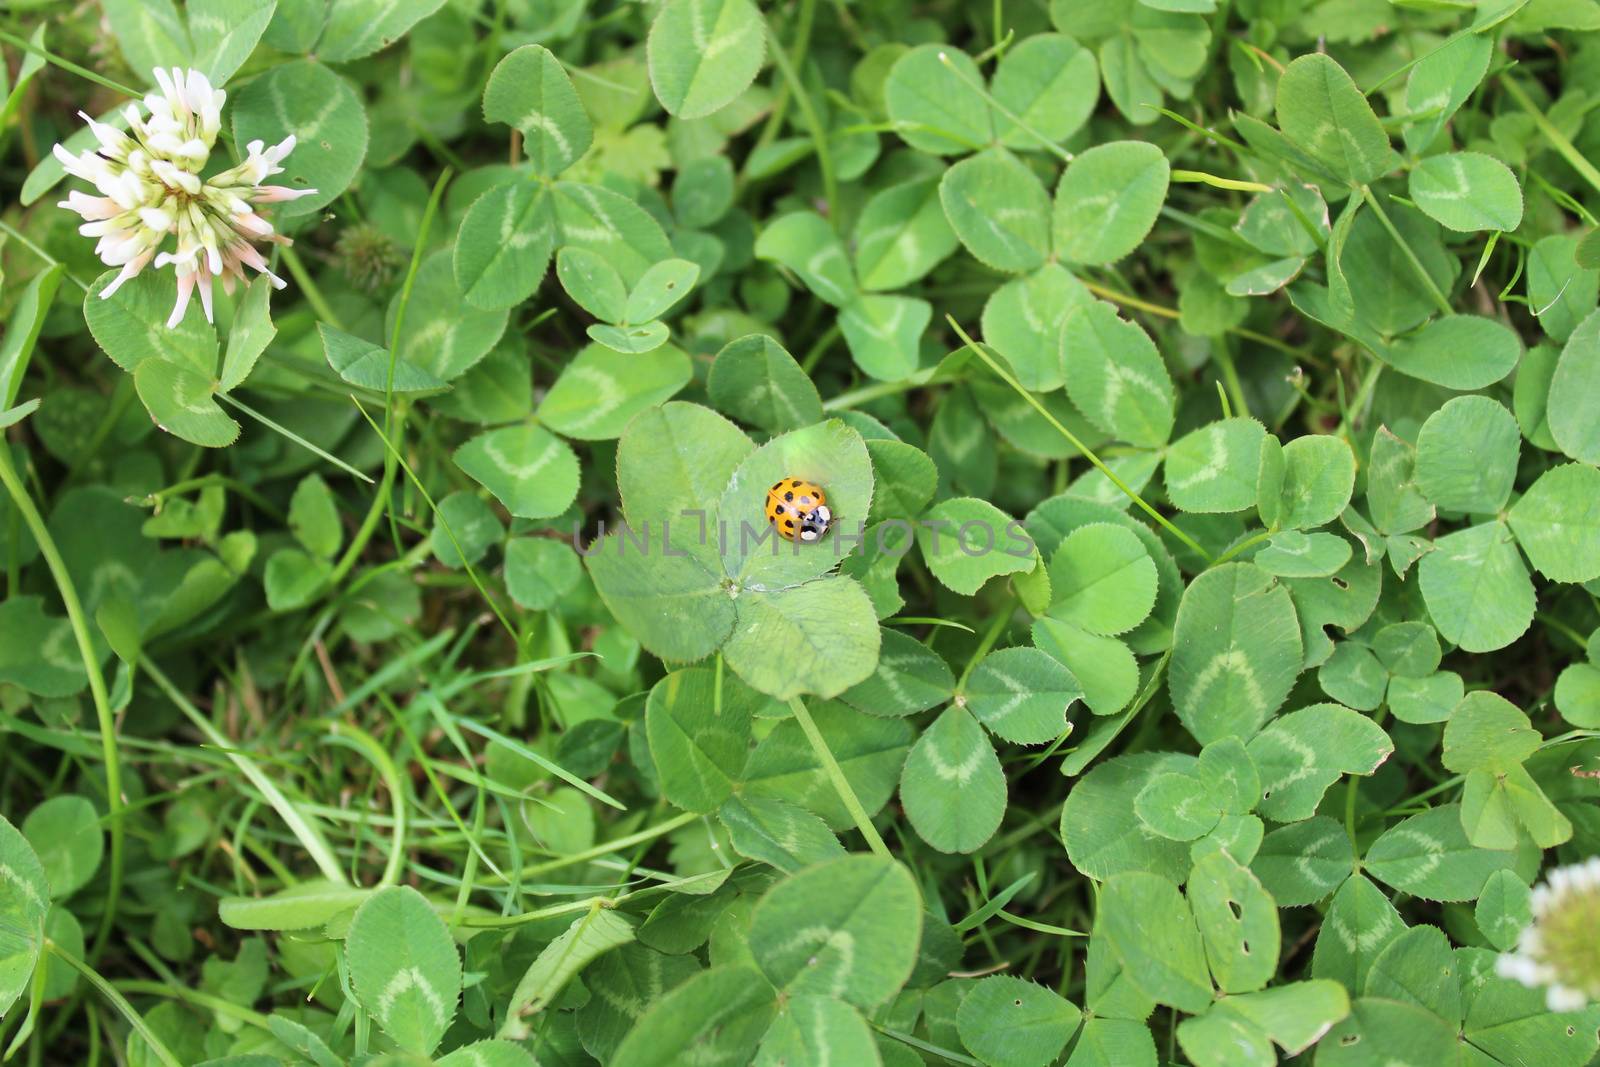 The picture shows a ladybird on a fourleaved clover in the garden